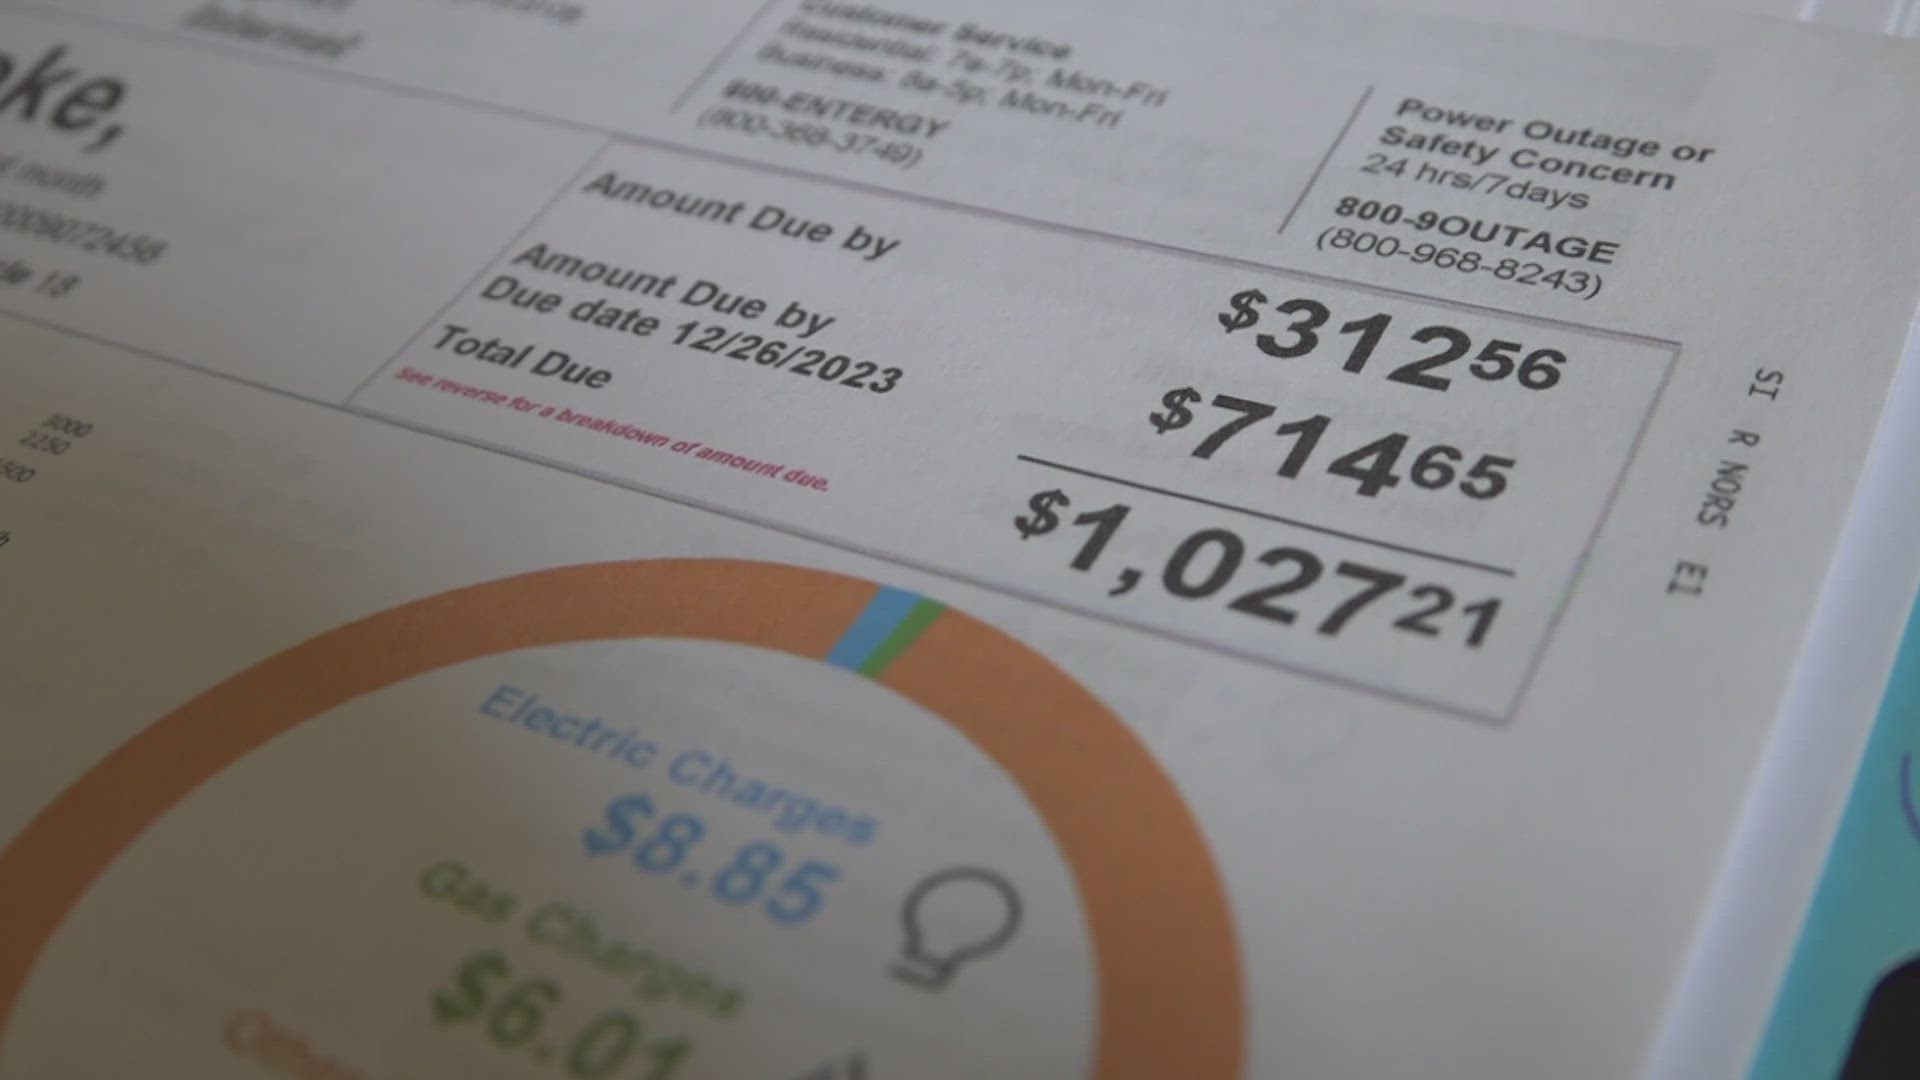 Here's how Entergy's 'level billing' works